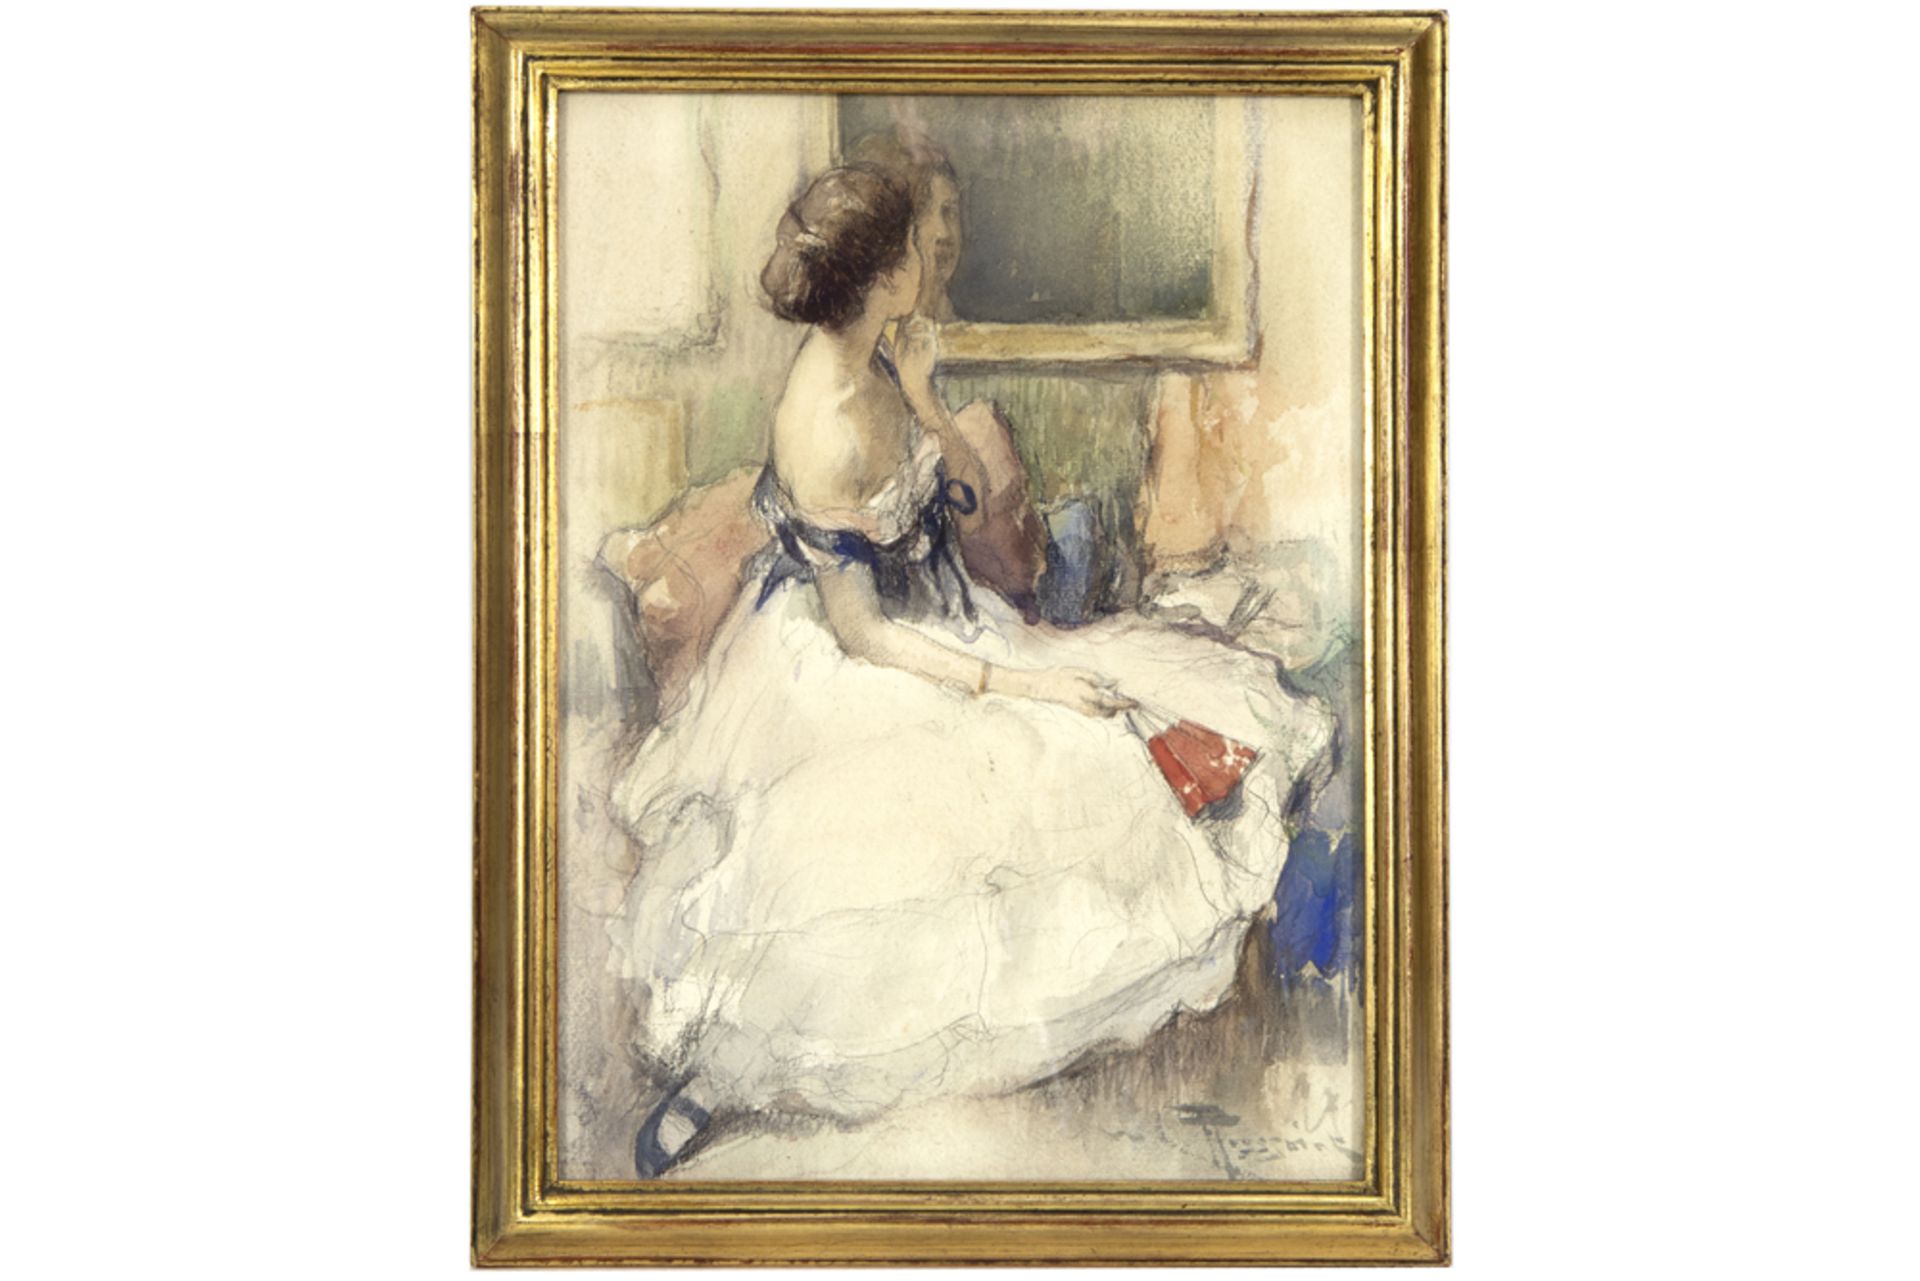 20th Cent. Belgian Fernand Toussaint signed mixed media with watercolor and pencil || ROUWKOOP - Image 3 of 3